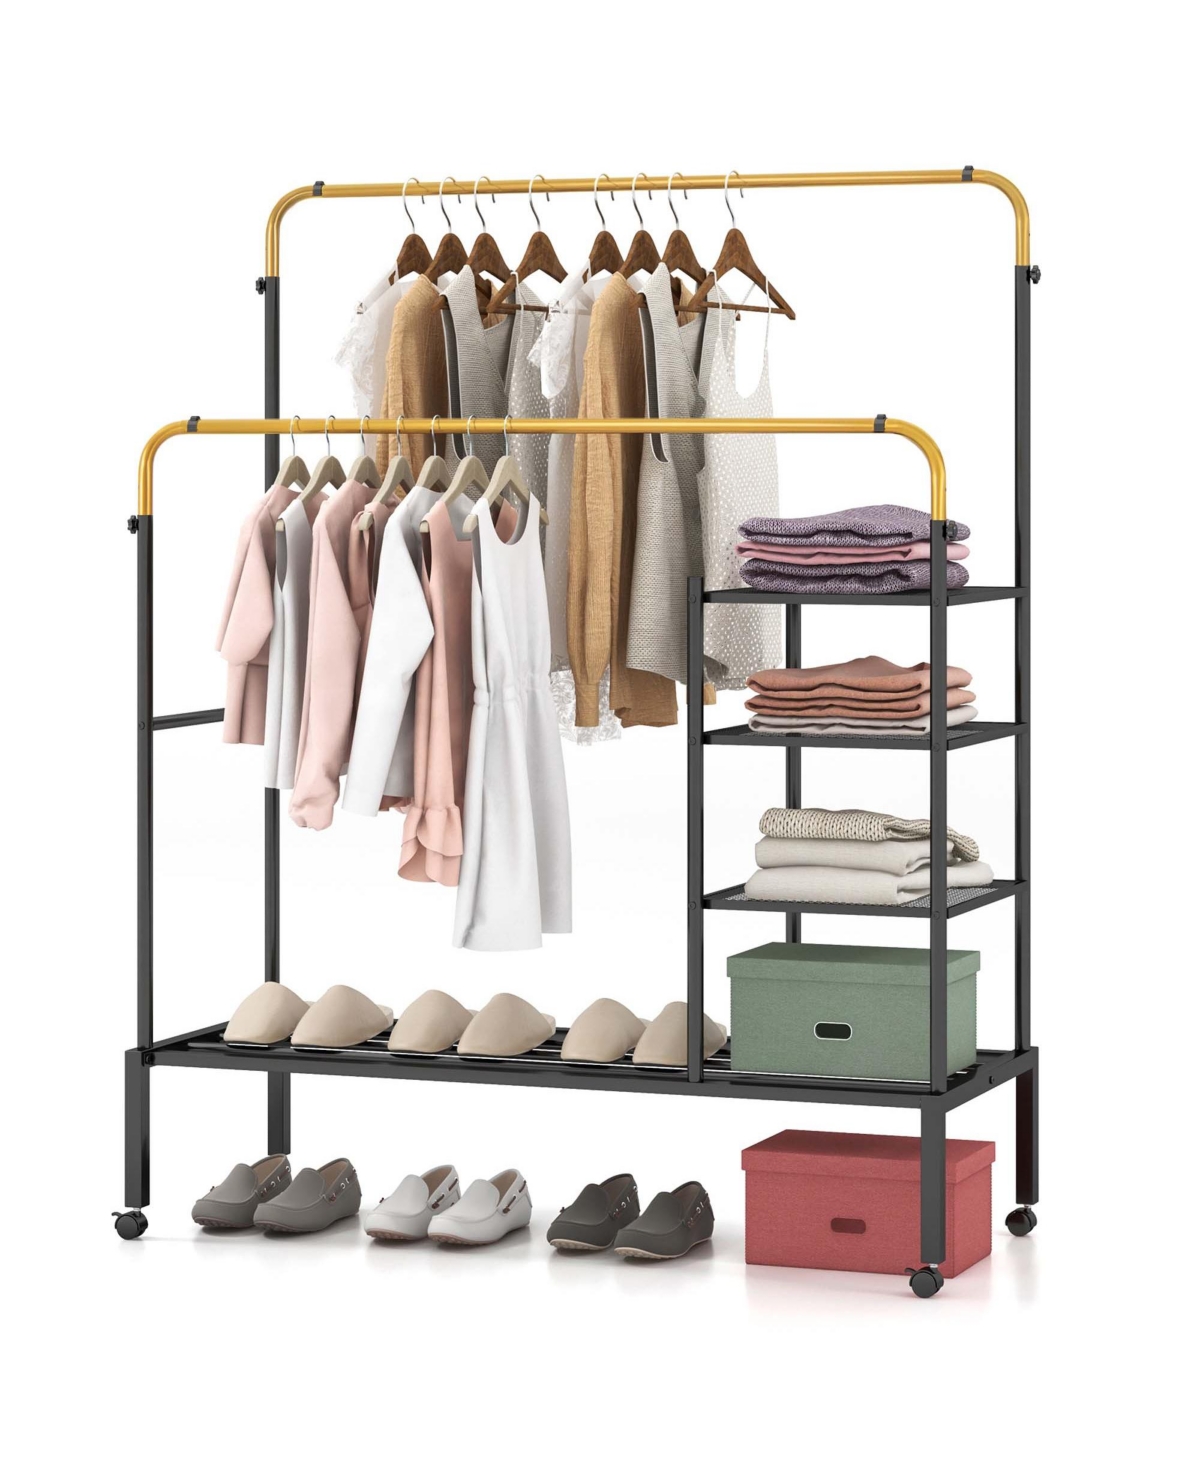 Rolling Clothes Drying Rack Double Rods Garment Rack with Height Adjustables - Silver